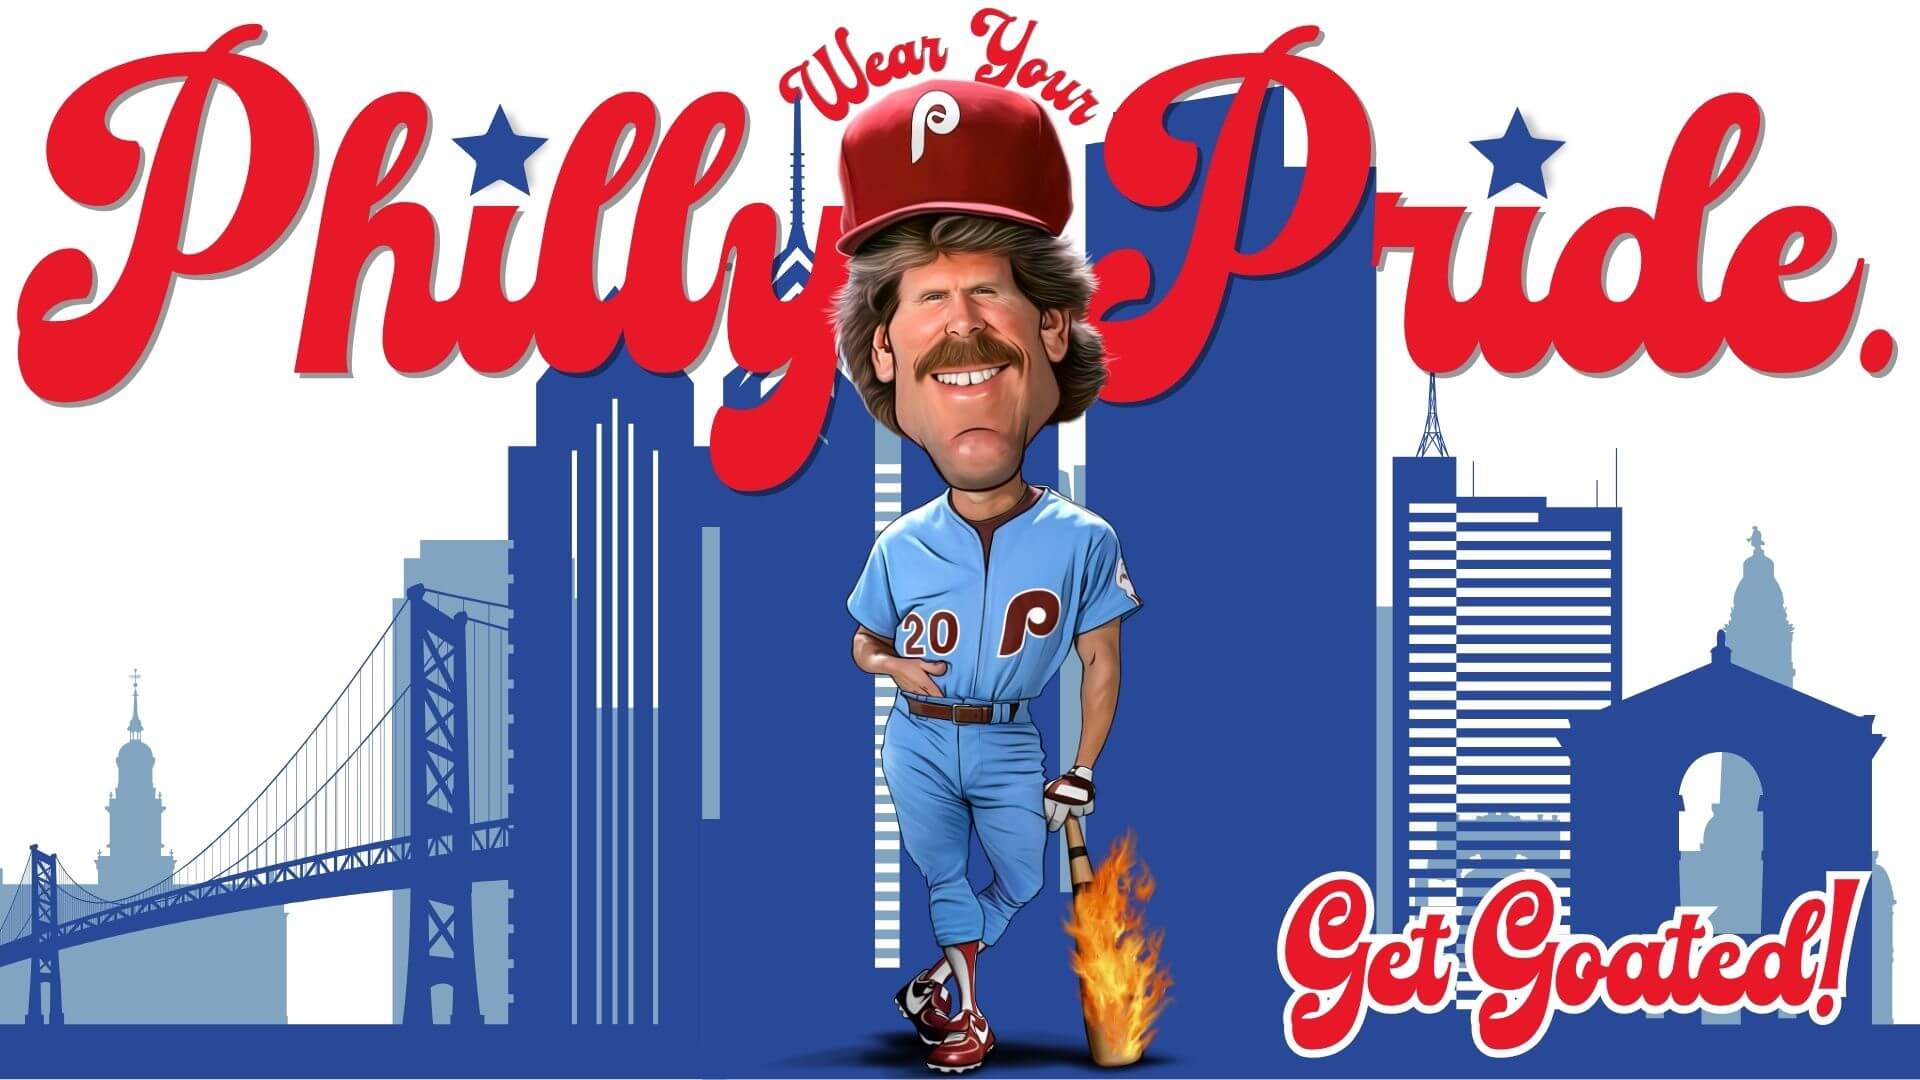 Phillygoat header image featuring a Mike Schmidt caricature in a Philadelphia Phillies uniform with the tagline "Wear Your Philly Pride" and Get Goated!